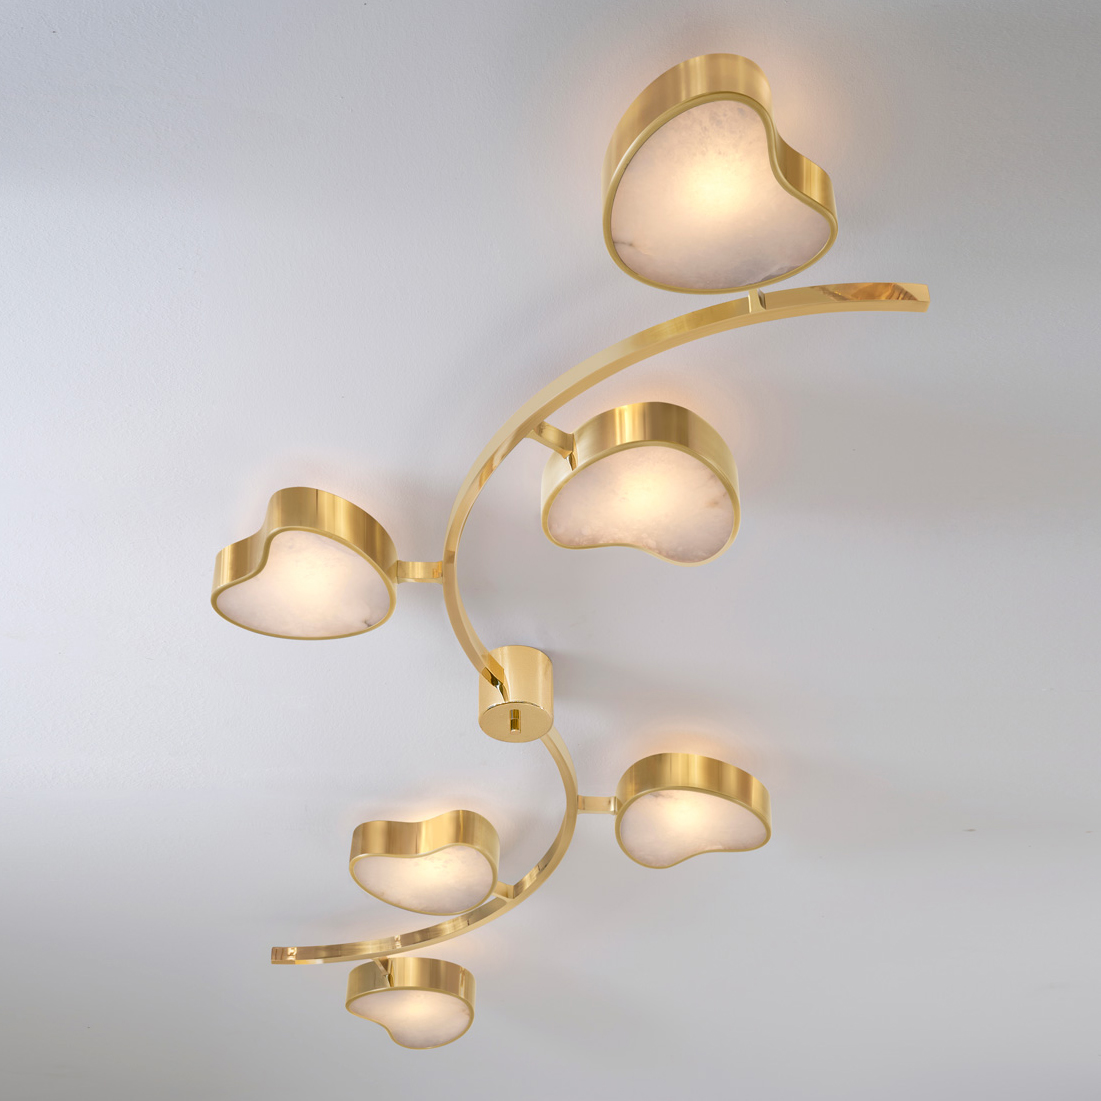 cuore n5 ceiling light by gaspare asaro